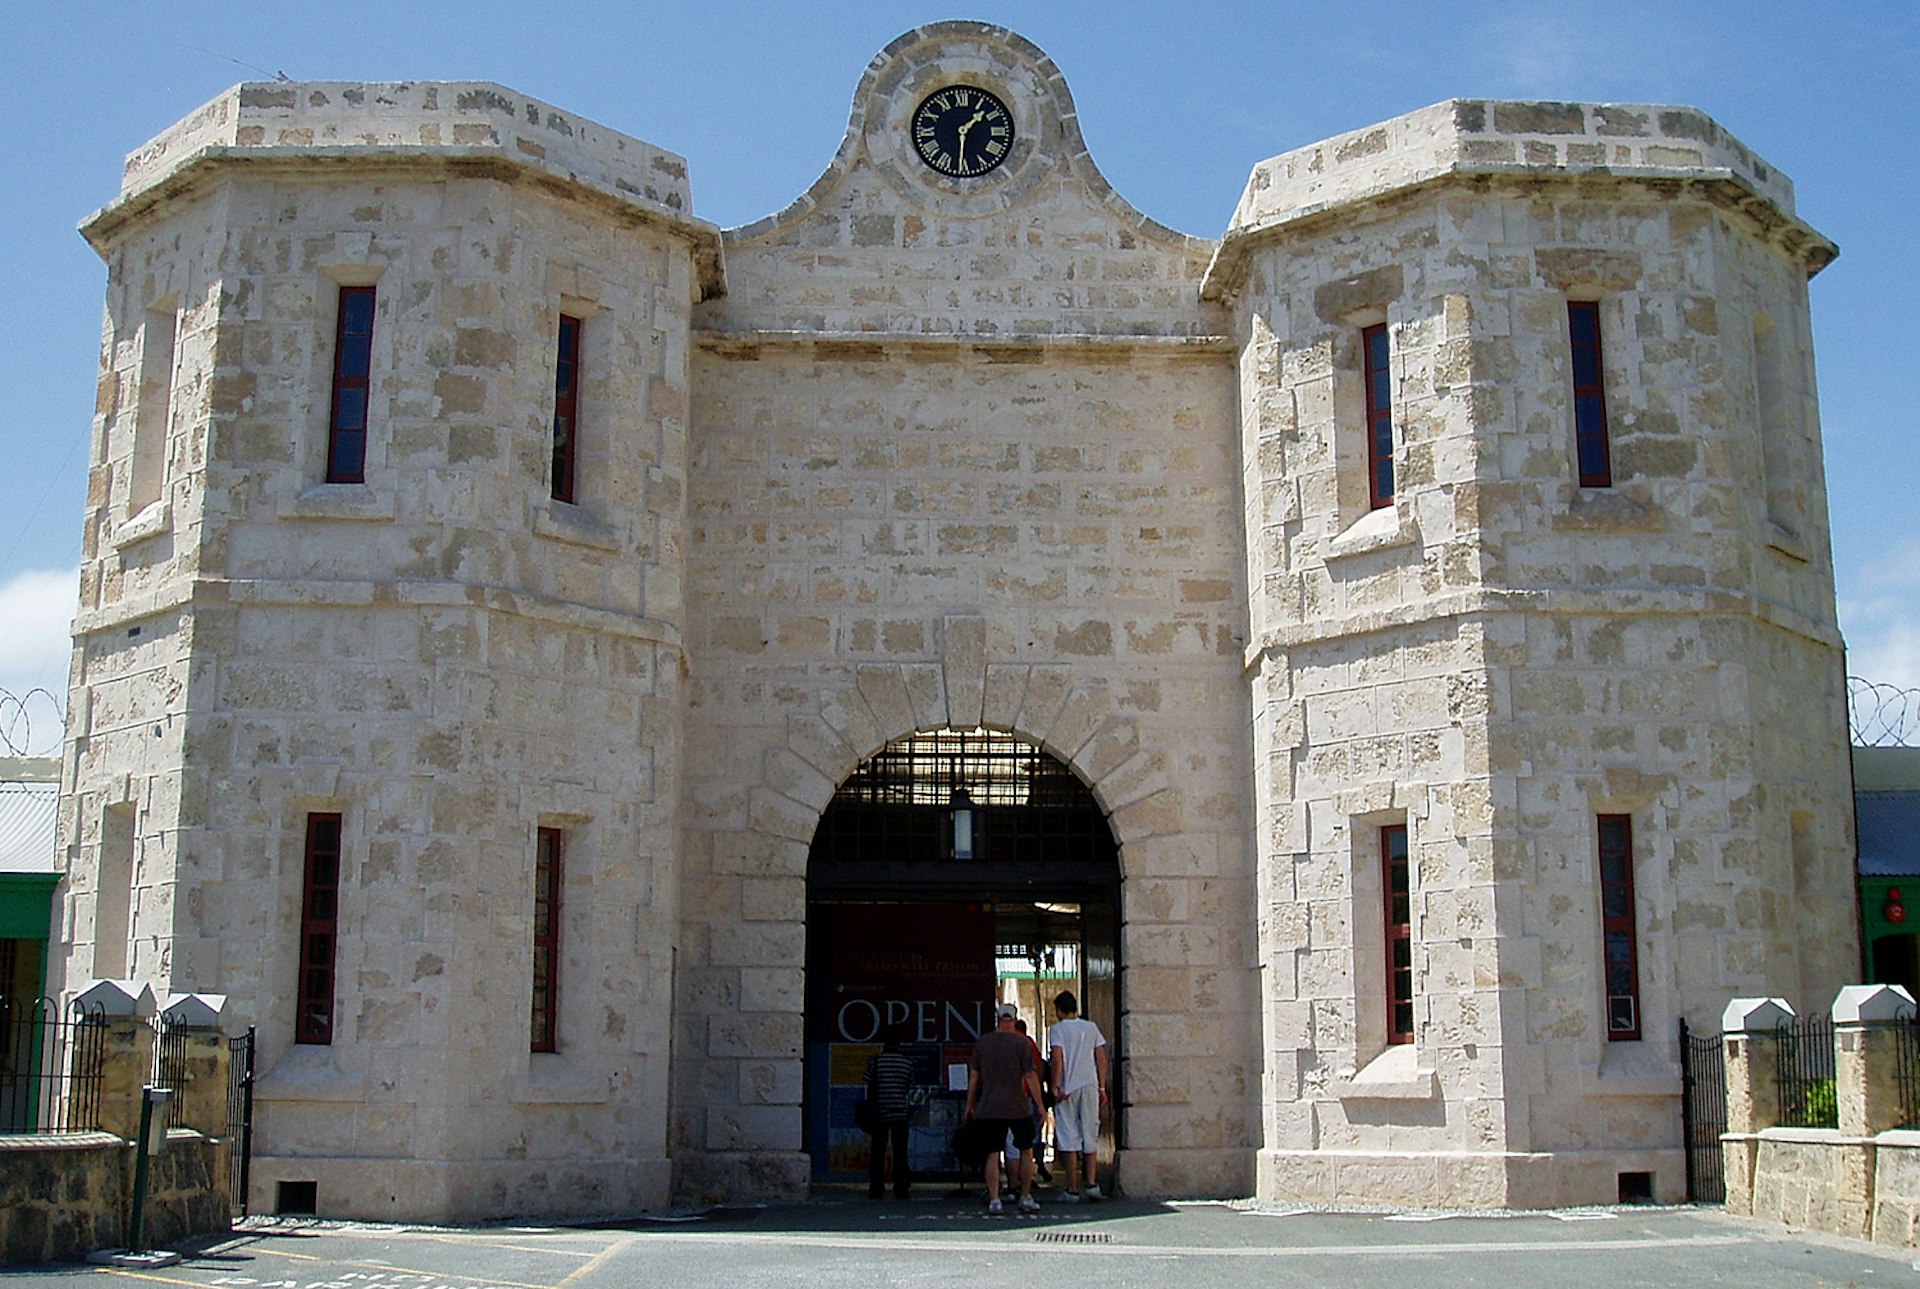 The sobering limestone facade of the gatehouse to Fremantle Prison. Image by Amanda Slater / CC BY-SA 2.0